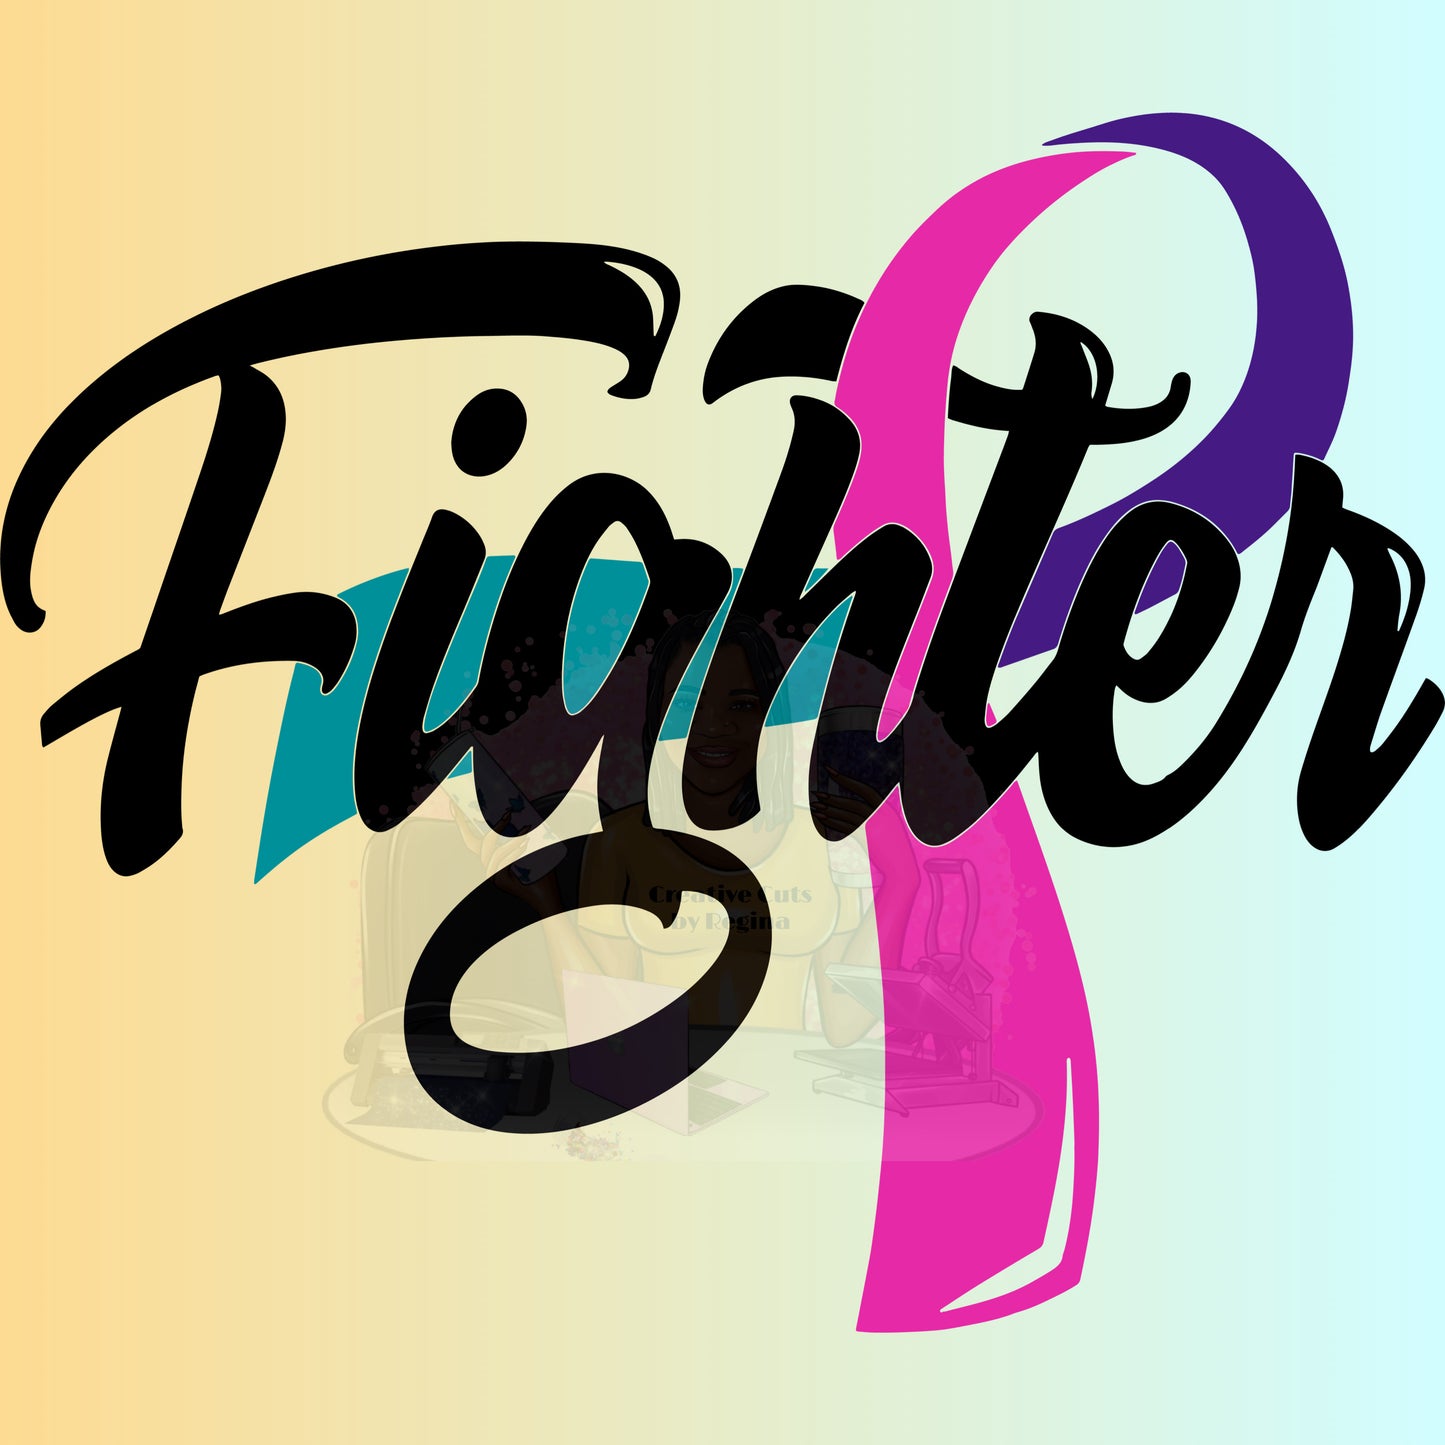 Cancer Fighter_Thyroid